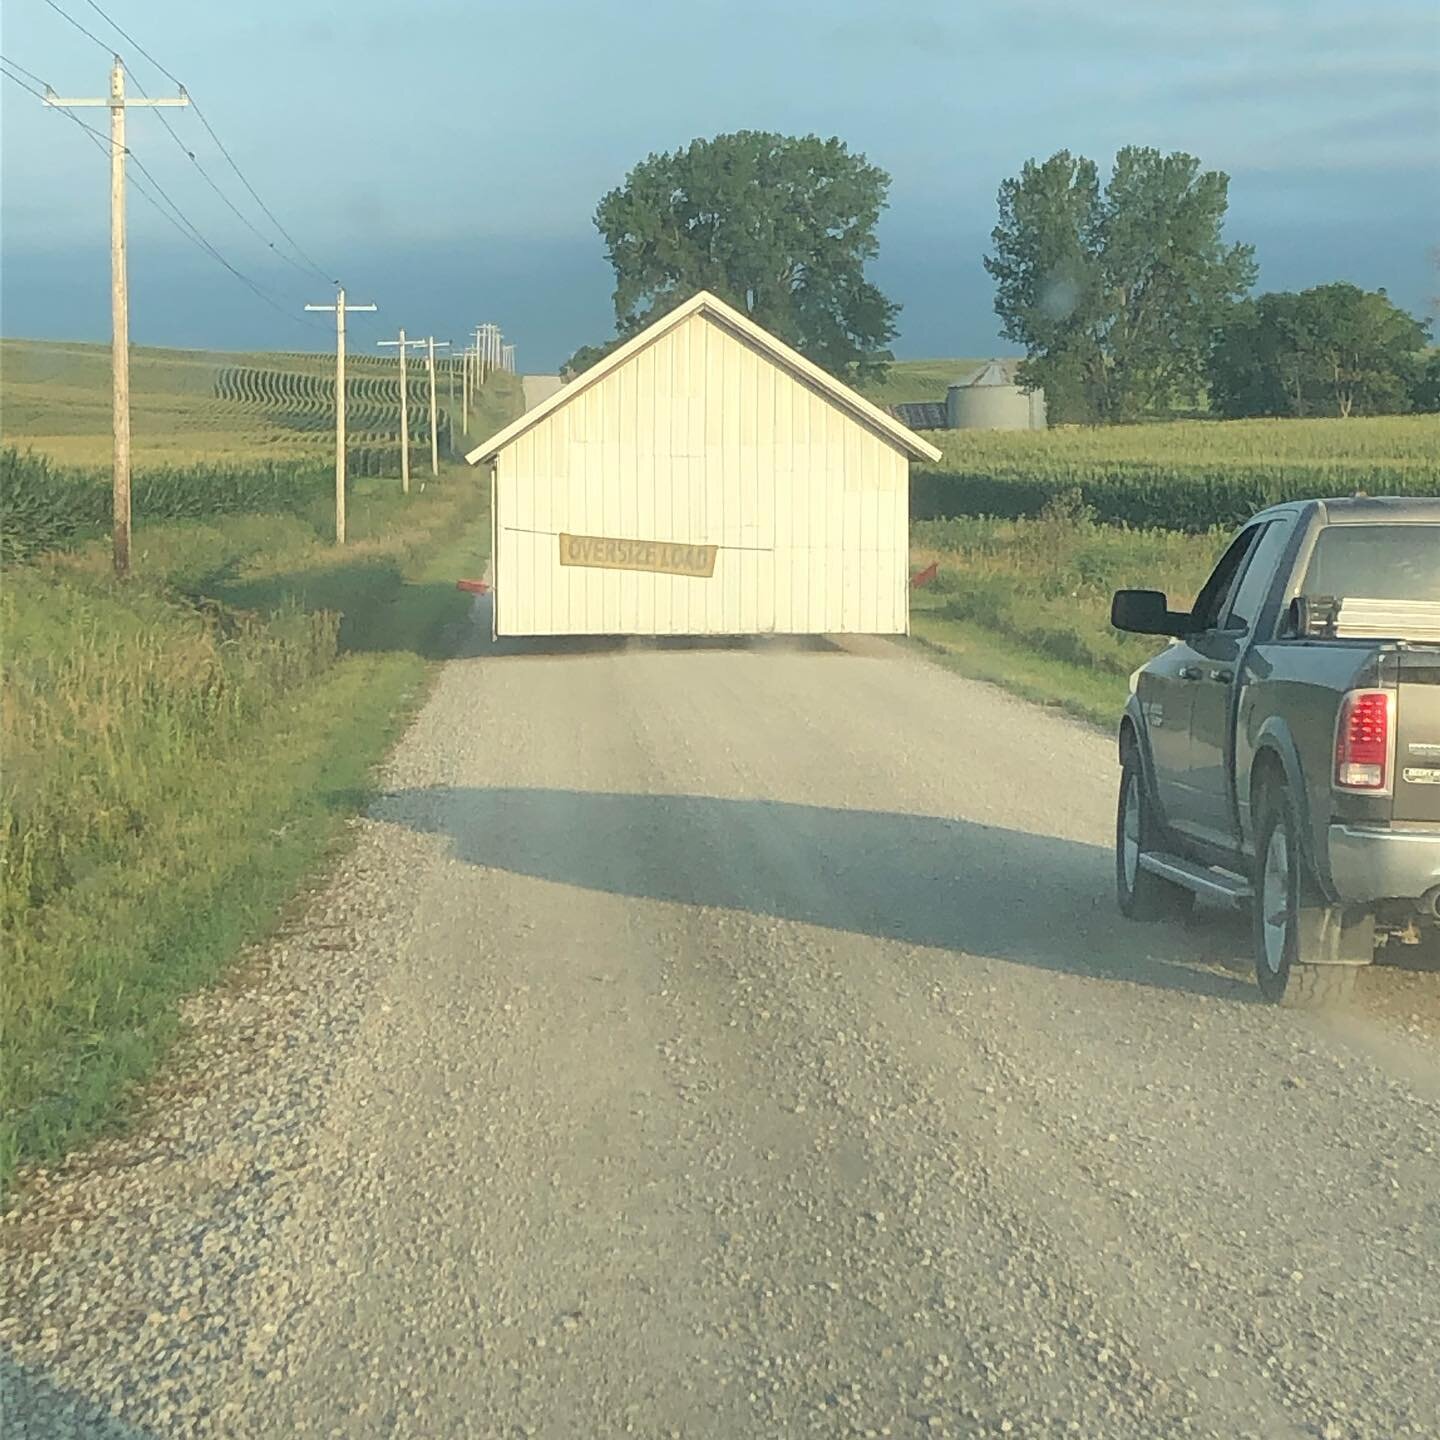 Last weekend we checked off another infrastructure project by moving a building 6 miles to our house. This building will serve as a larger brooder for our poultry enterprise. We are especially grateful for the assistance of TnT Landscaping in William